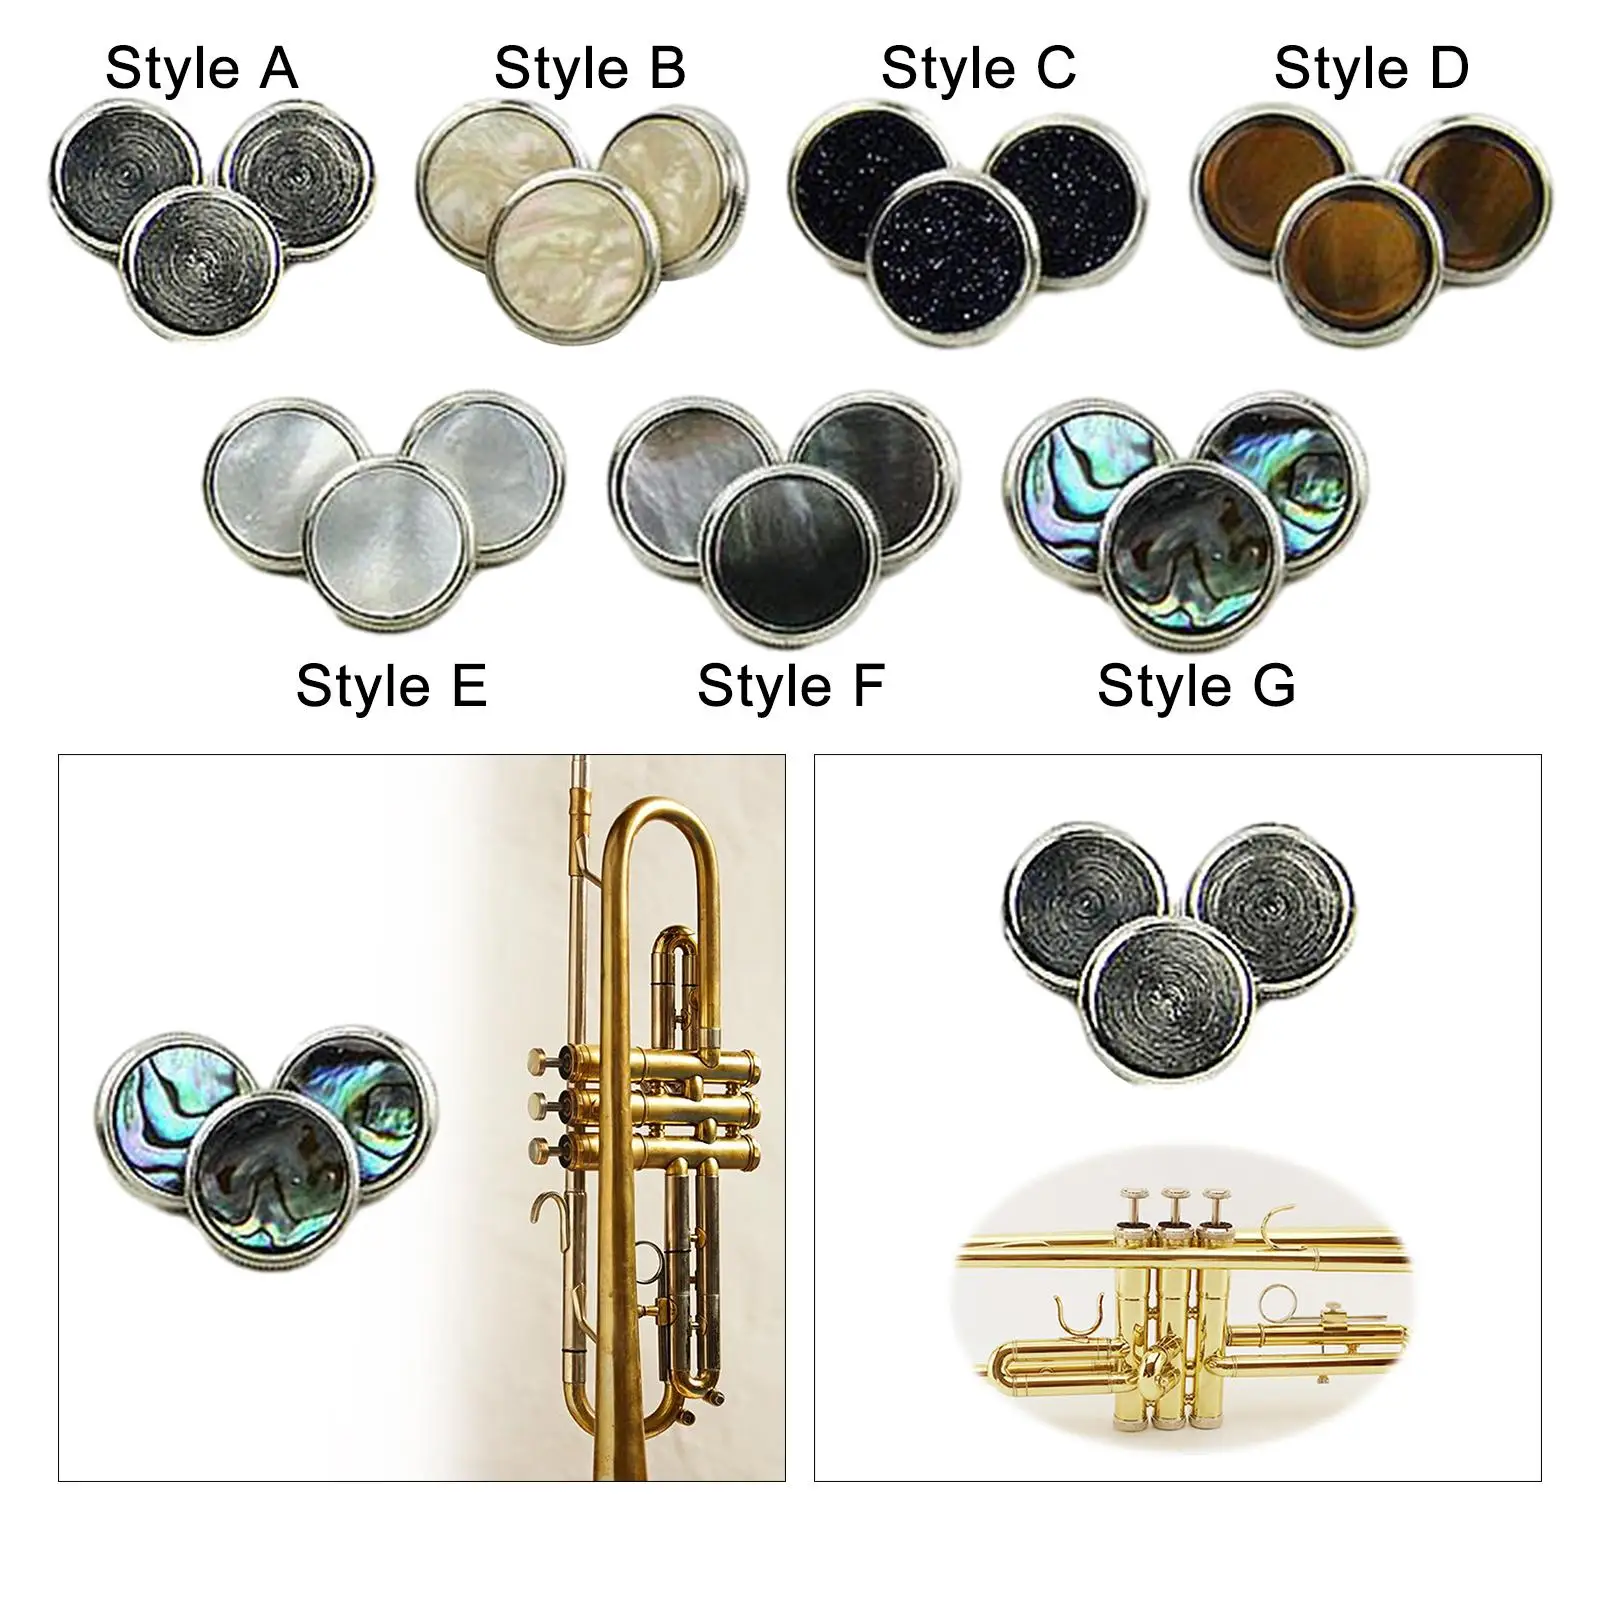 Trumpet Gig Knobs Replacement Key Parts Brass Accessories Replacement Tools for